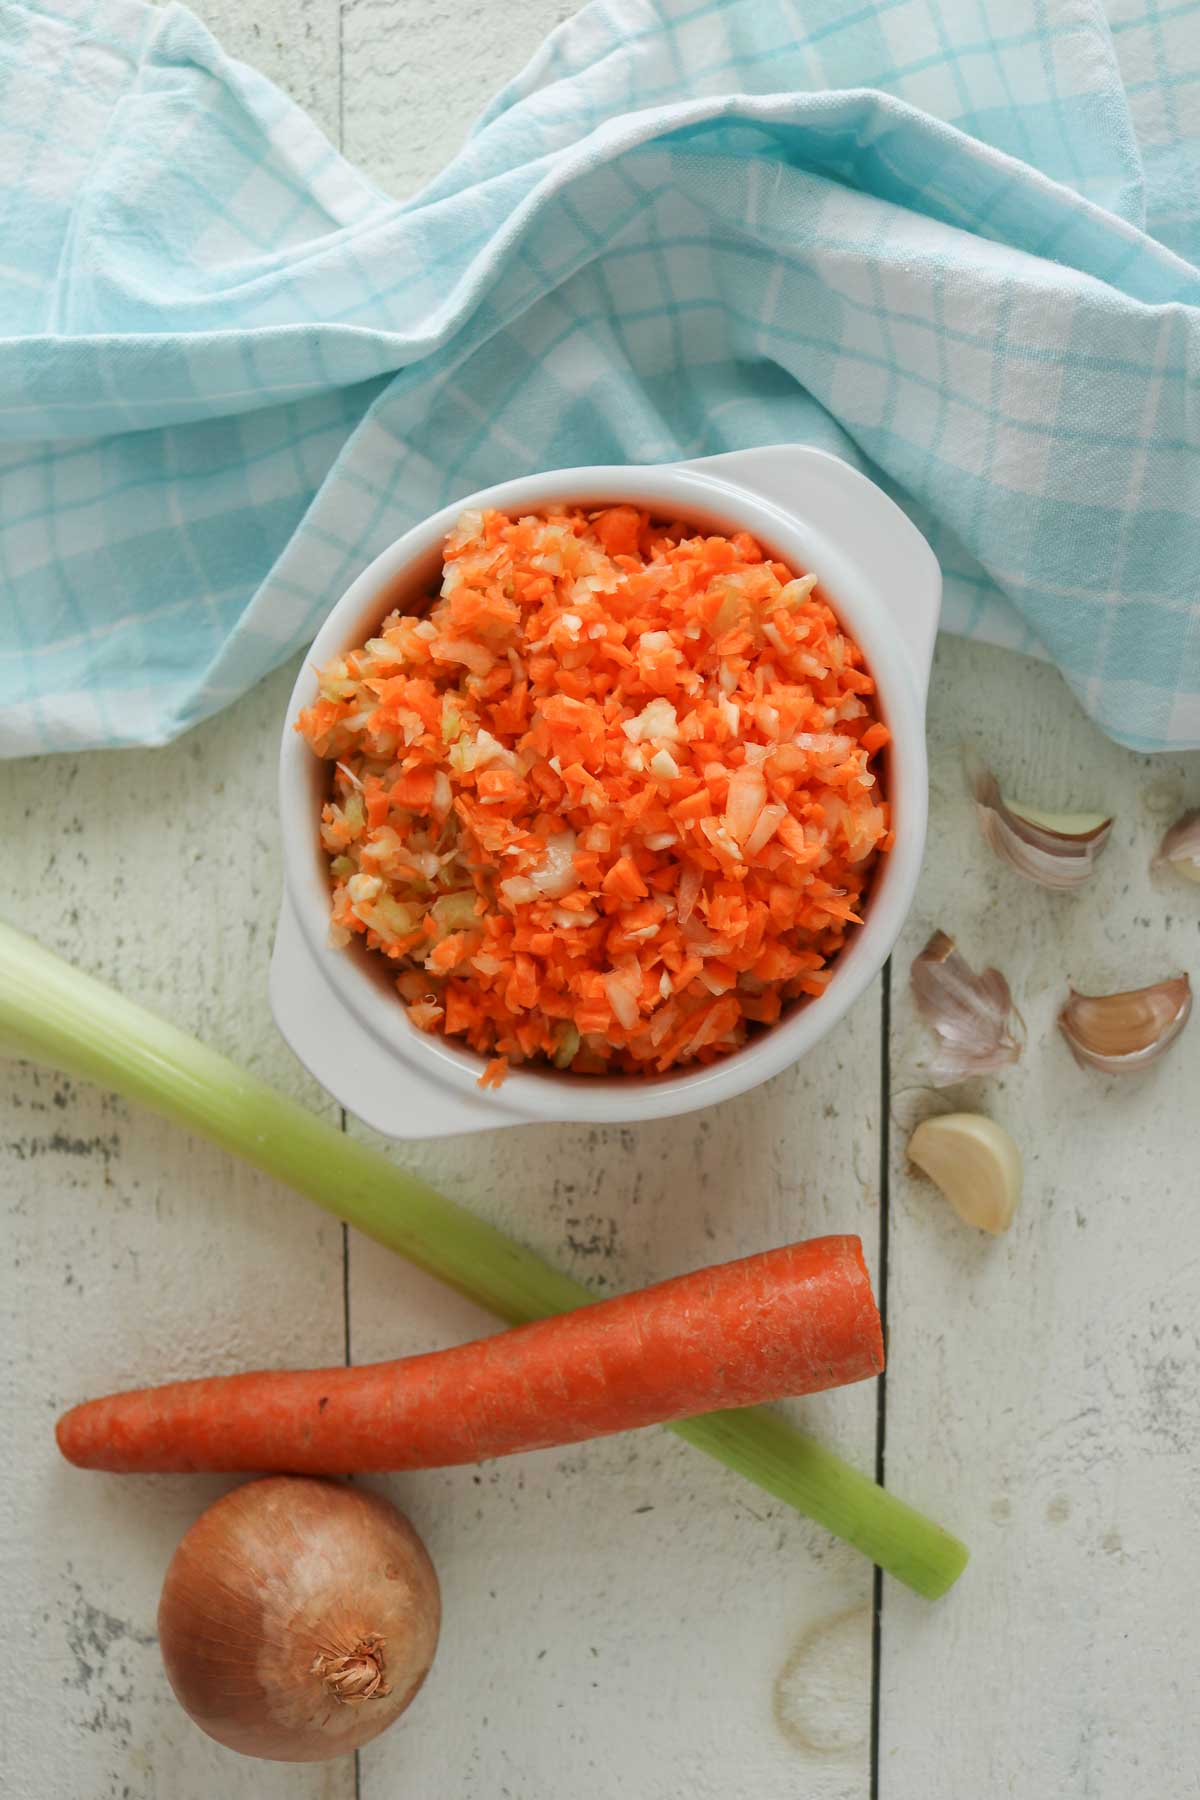 Bowl of finely chopped veggies next to a whole carrot, rib of celery, onion and garlic cloves.